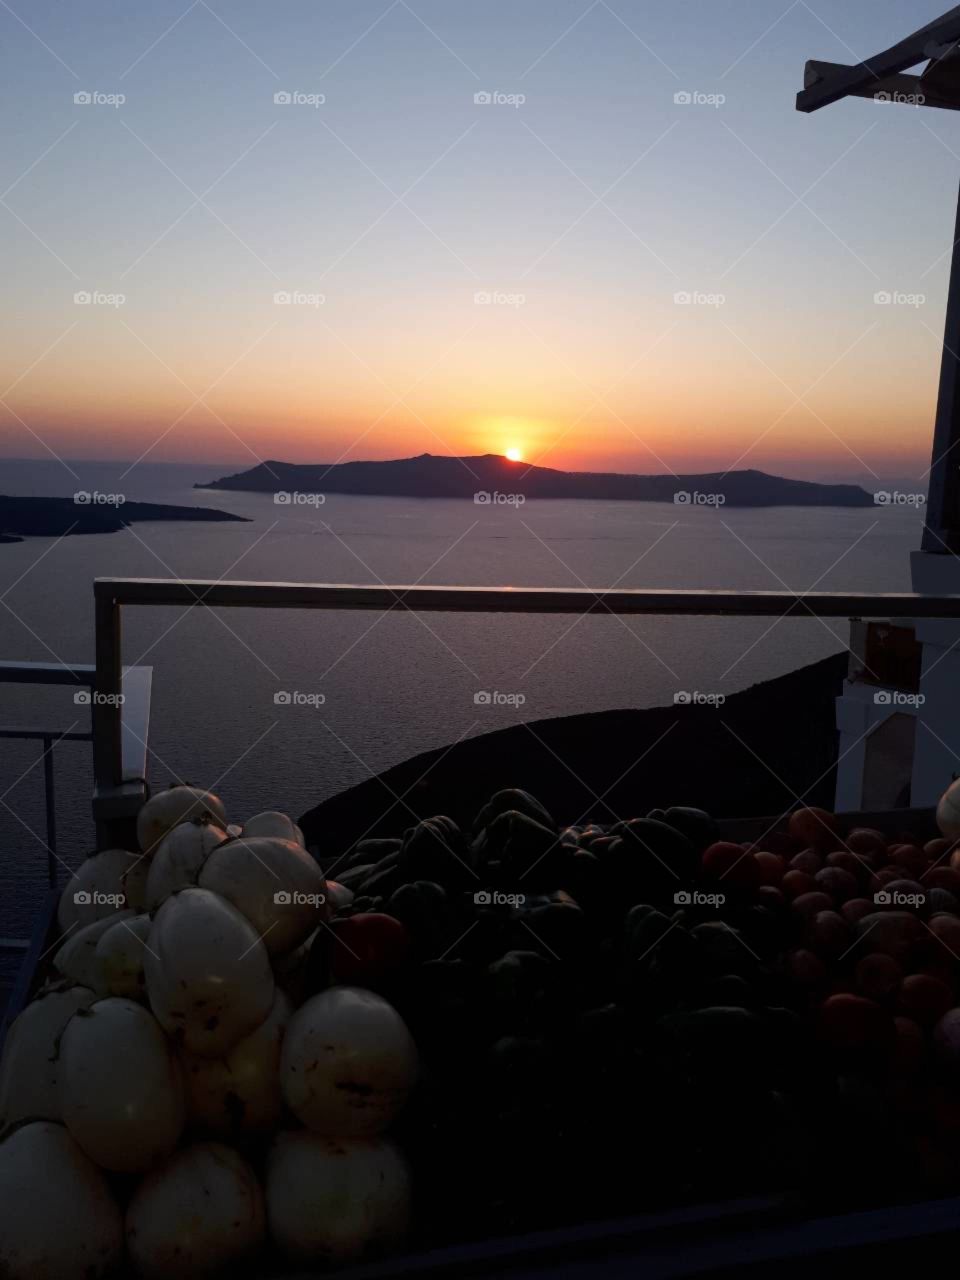 Fruits and vegetables in an open balcony with Sunset view.